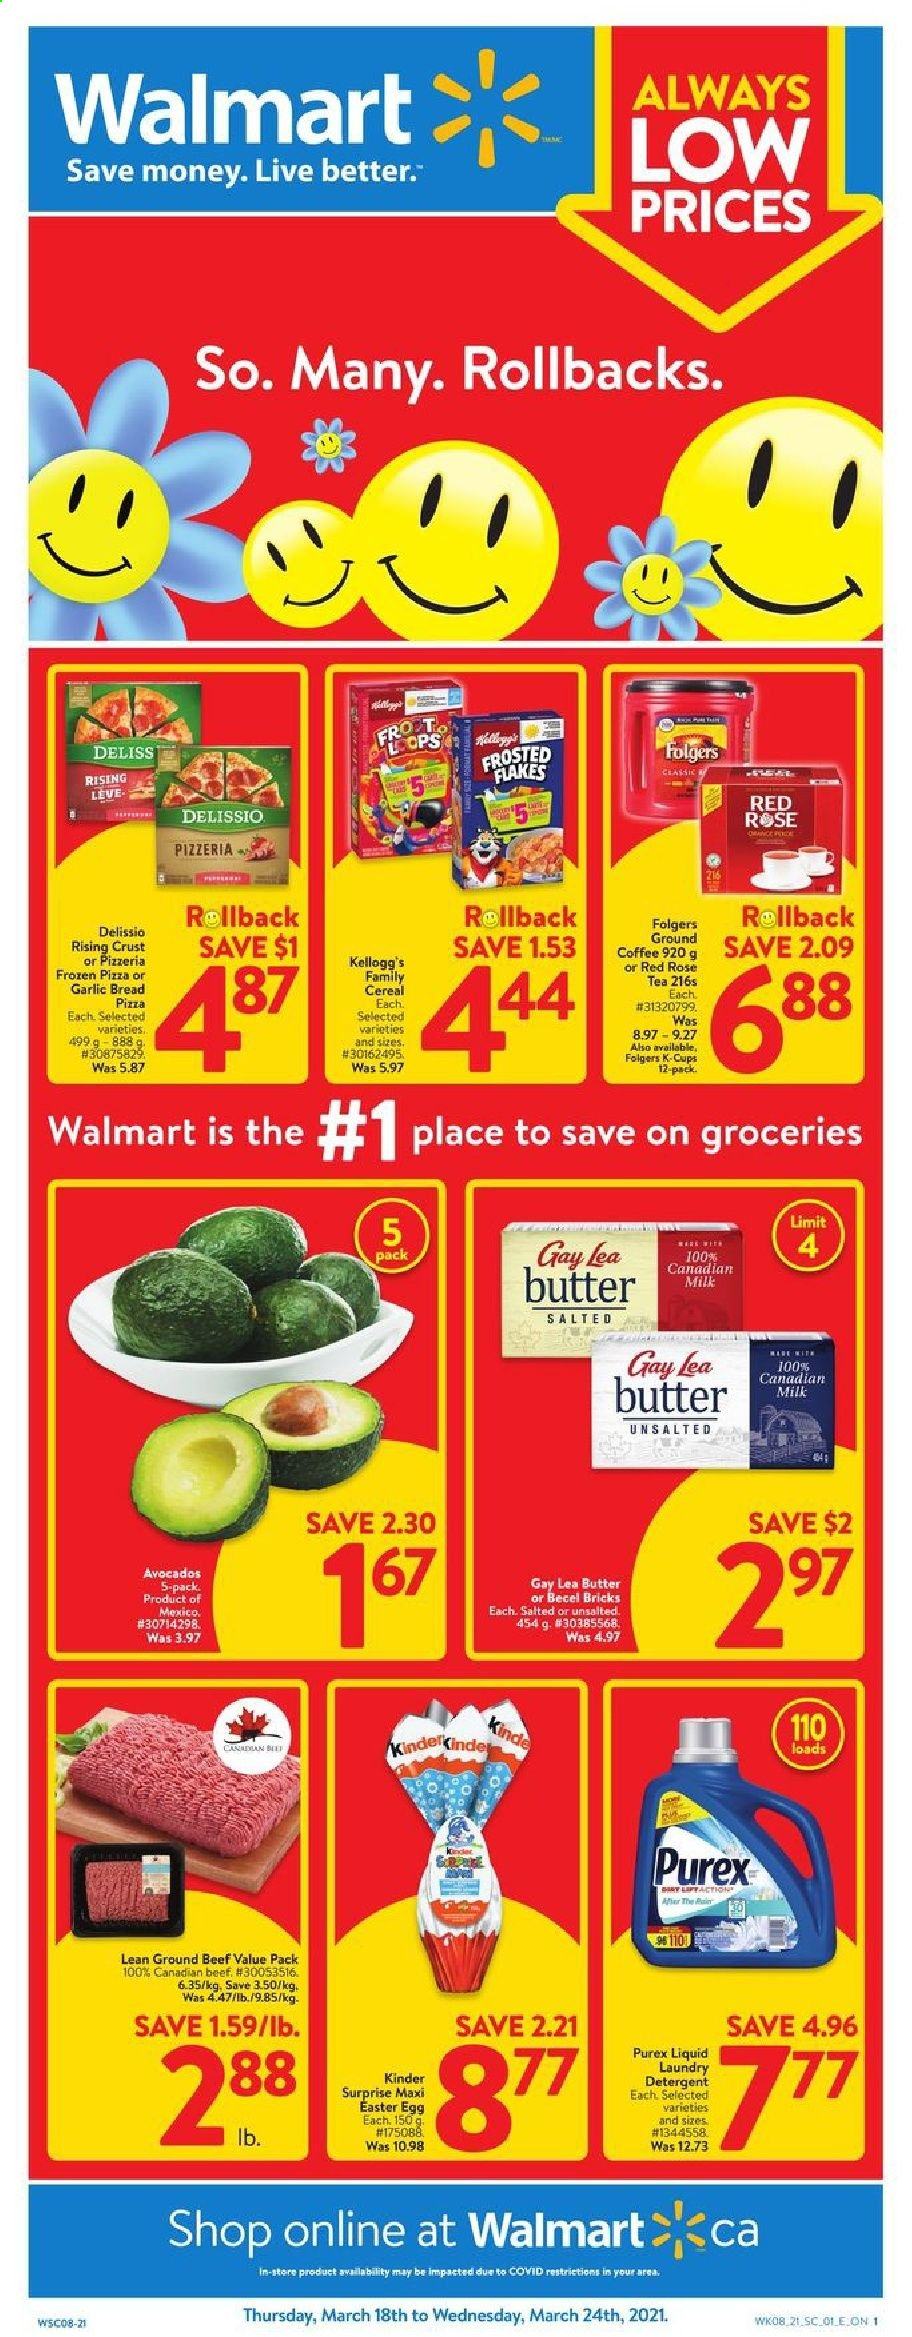 thumbnail - Walmart Flyer - March 18, 2021 - March 24, 2021 - Sales products - bread, avocado, pizza, milk, eggs, butter, Kinder Surprise, Kellogg's, cereals, Frosted Flakes, tea, coffee, Folgers, ground coffee, wine, rosé wine, beef meat, ground beef, laundry detergent, Purex, cup, easter egg, rose. Page 1.